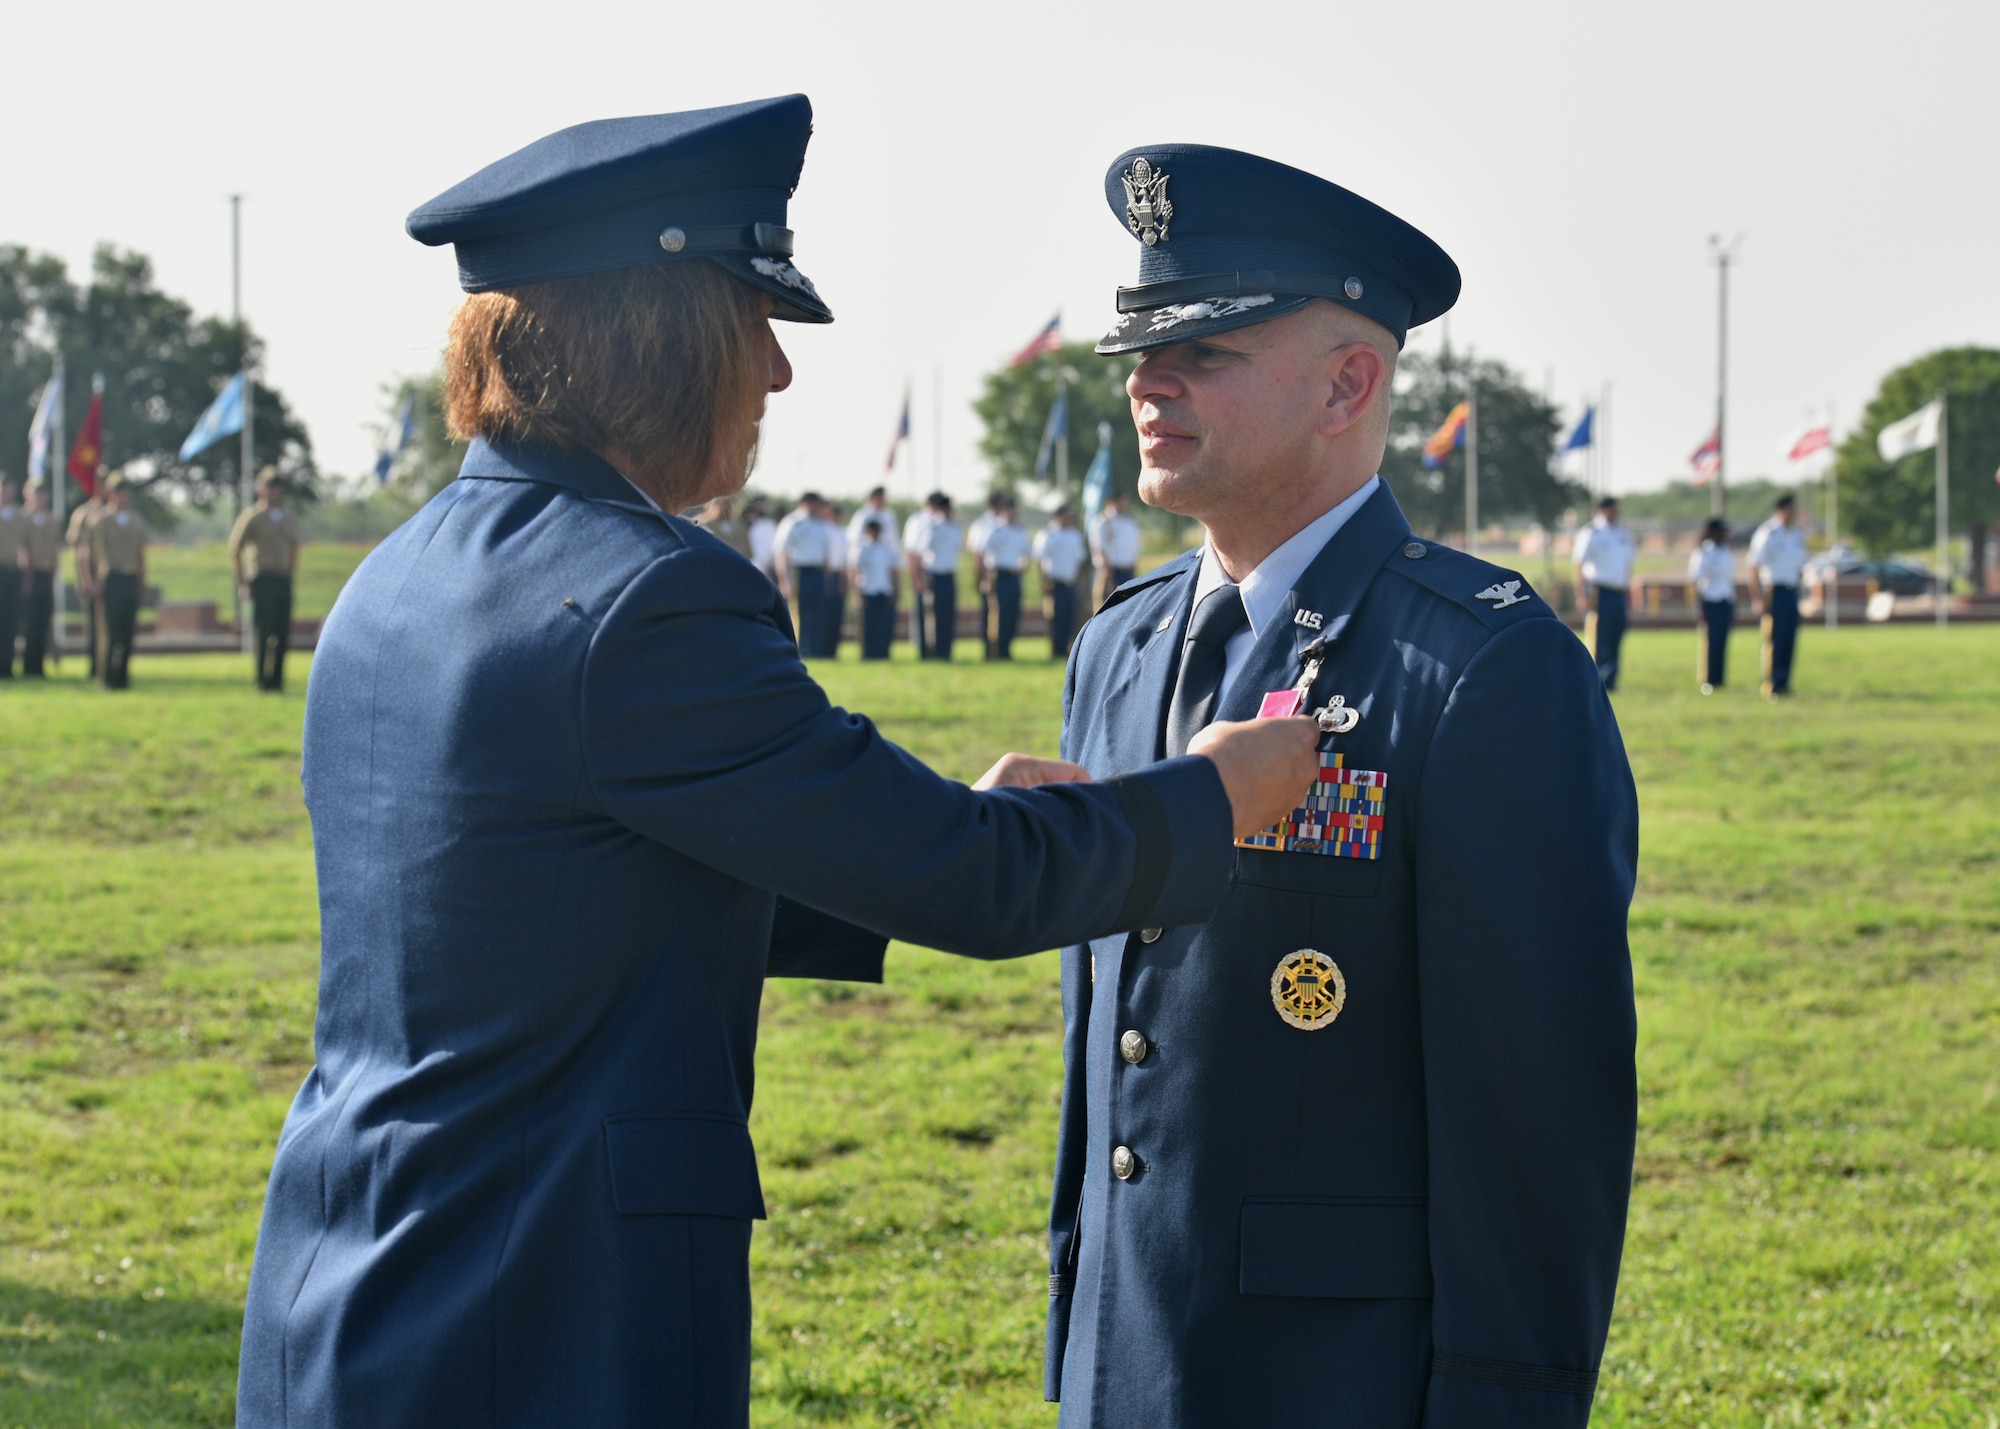 U.S. Air Force Maj. Gen. Andrea Tullos, Second Air Force commander, presents the Legion of the Merit to the 17th Training Wing outgoing commander, Col. Andres Nazario, during the 17th TRW change of command ceremony on Goodfellow Air Force Base, Texas, July 13, 2021. Nazario is transferring to the Pentagon, Washington, D.C. (U.S. Air Force photo by Senior Airman Ashley Thrash)